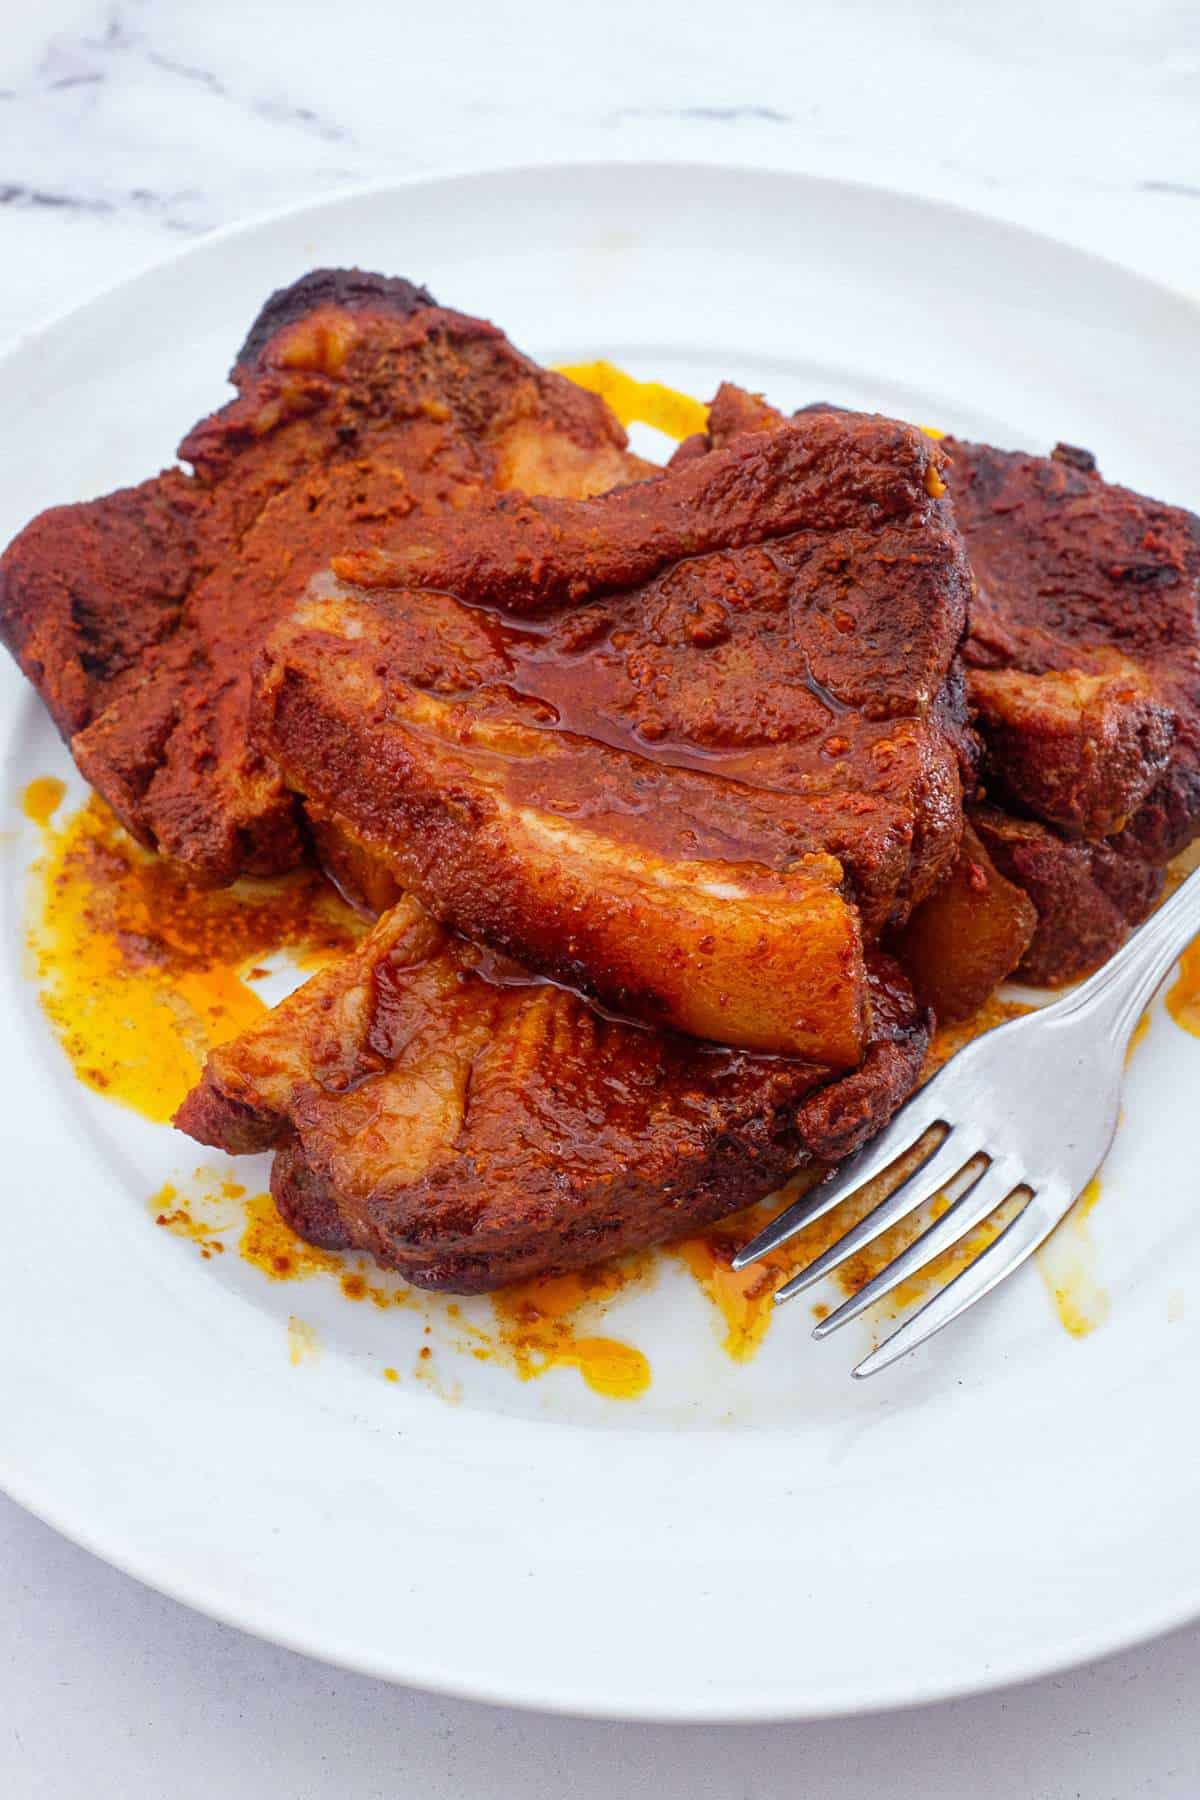 Slices of Pampanella Molisana, bright red slow-roasted pork in paprika on a plate with a fork